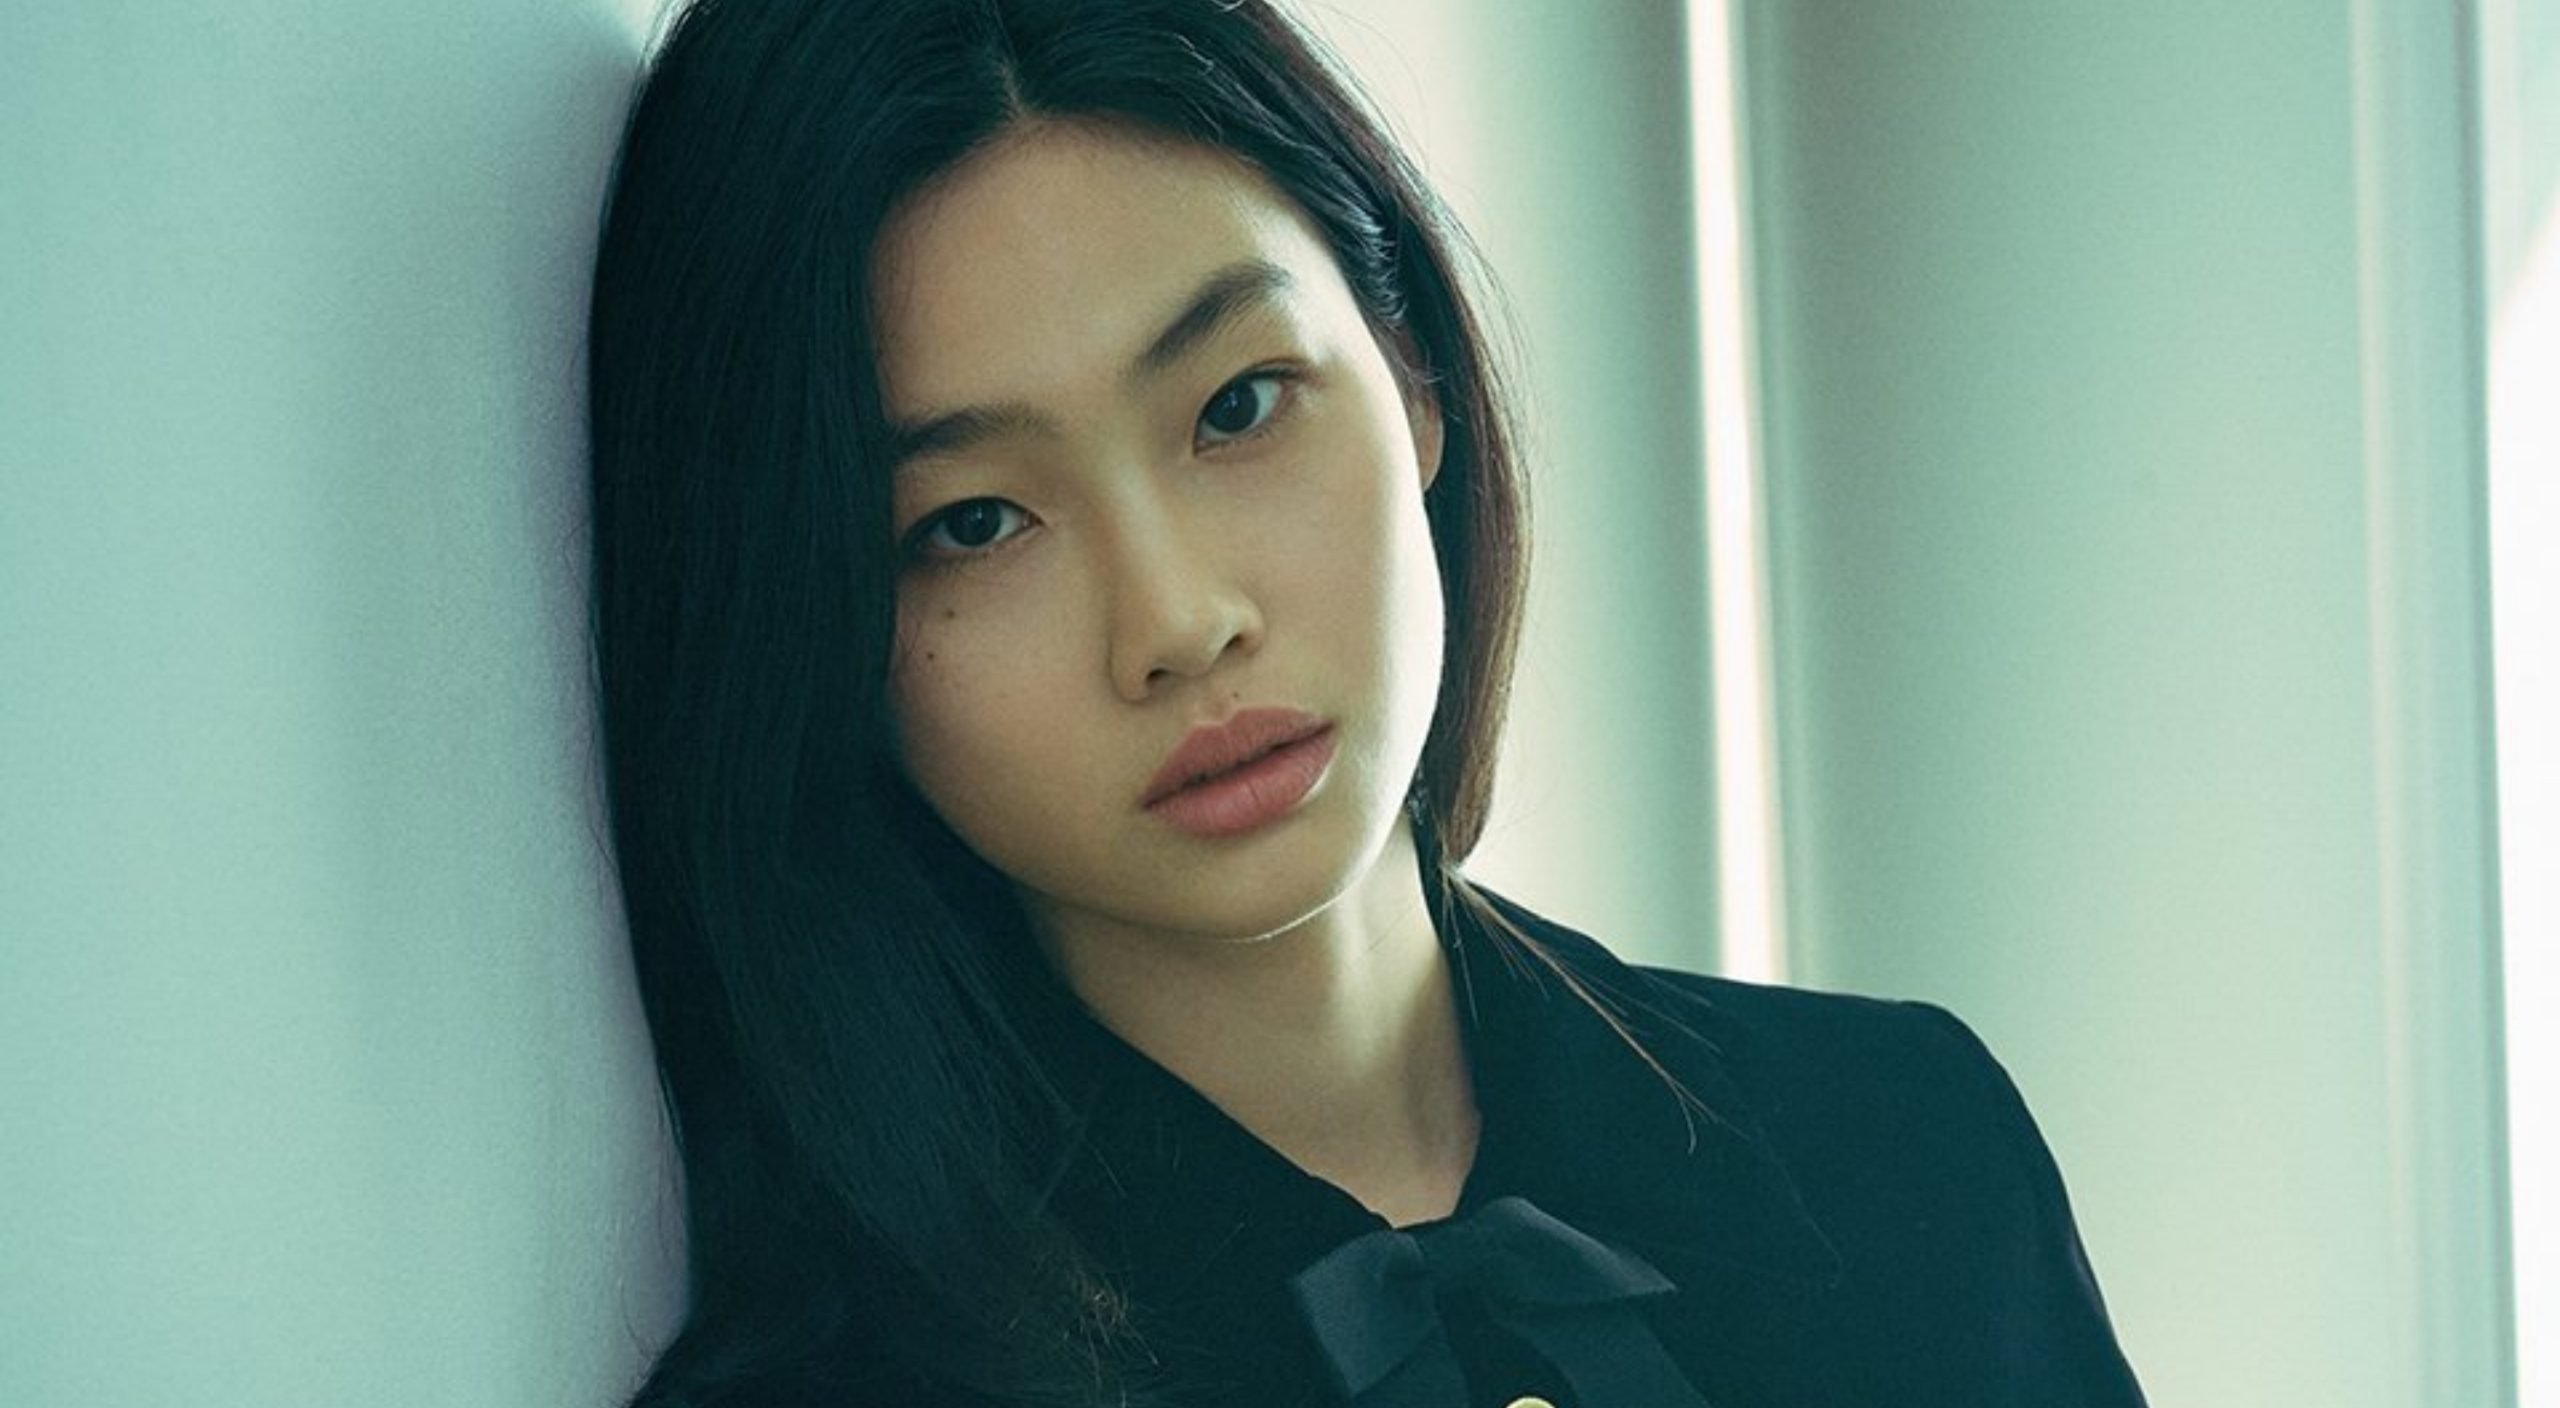 Squid Game's Jung Ho-yeon Made Her Acting Debut in the Series